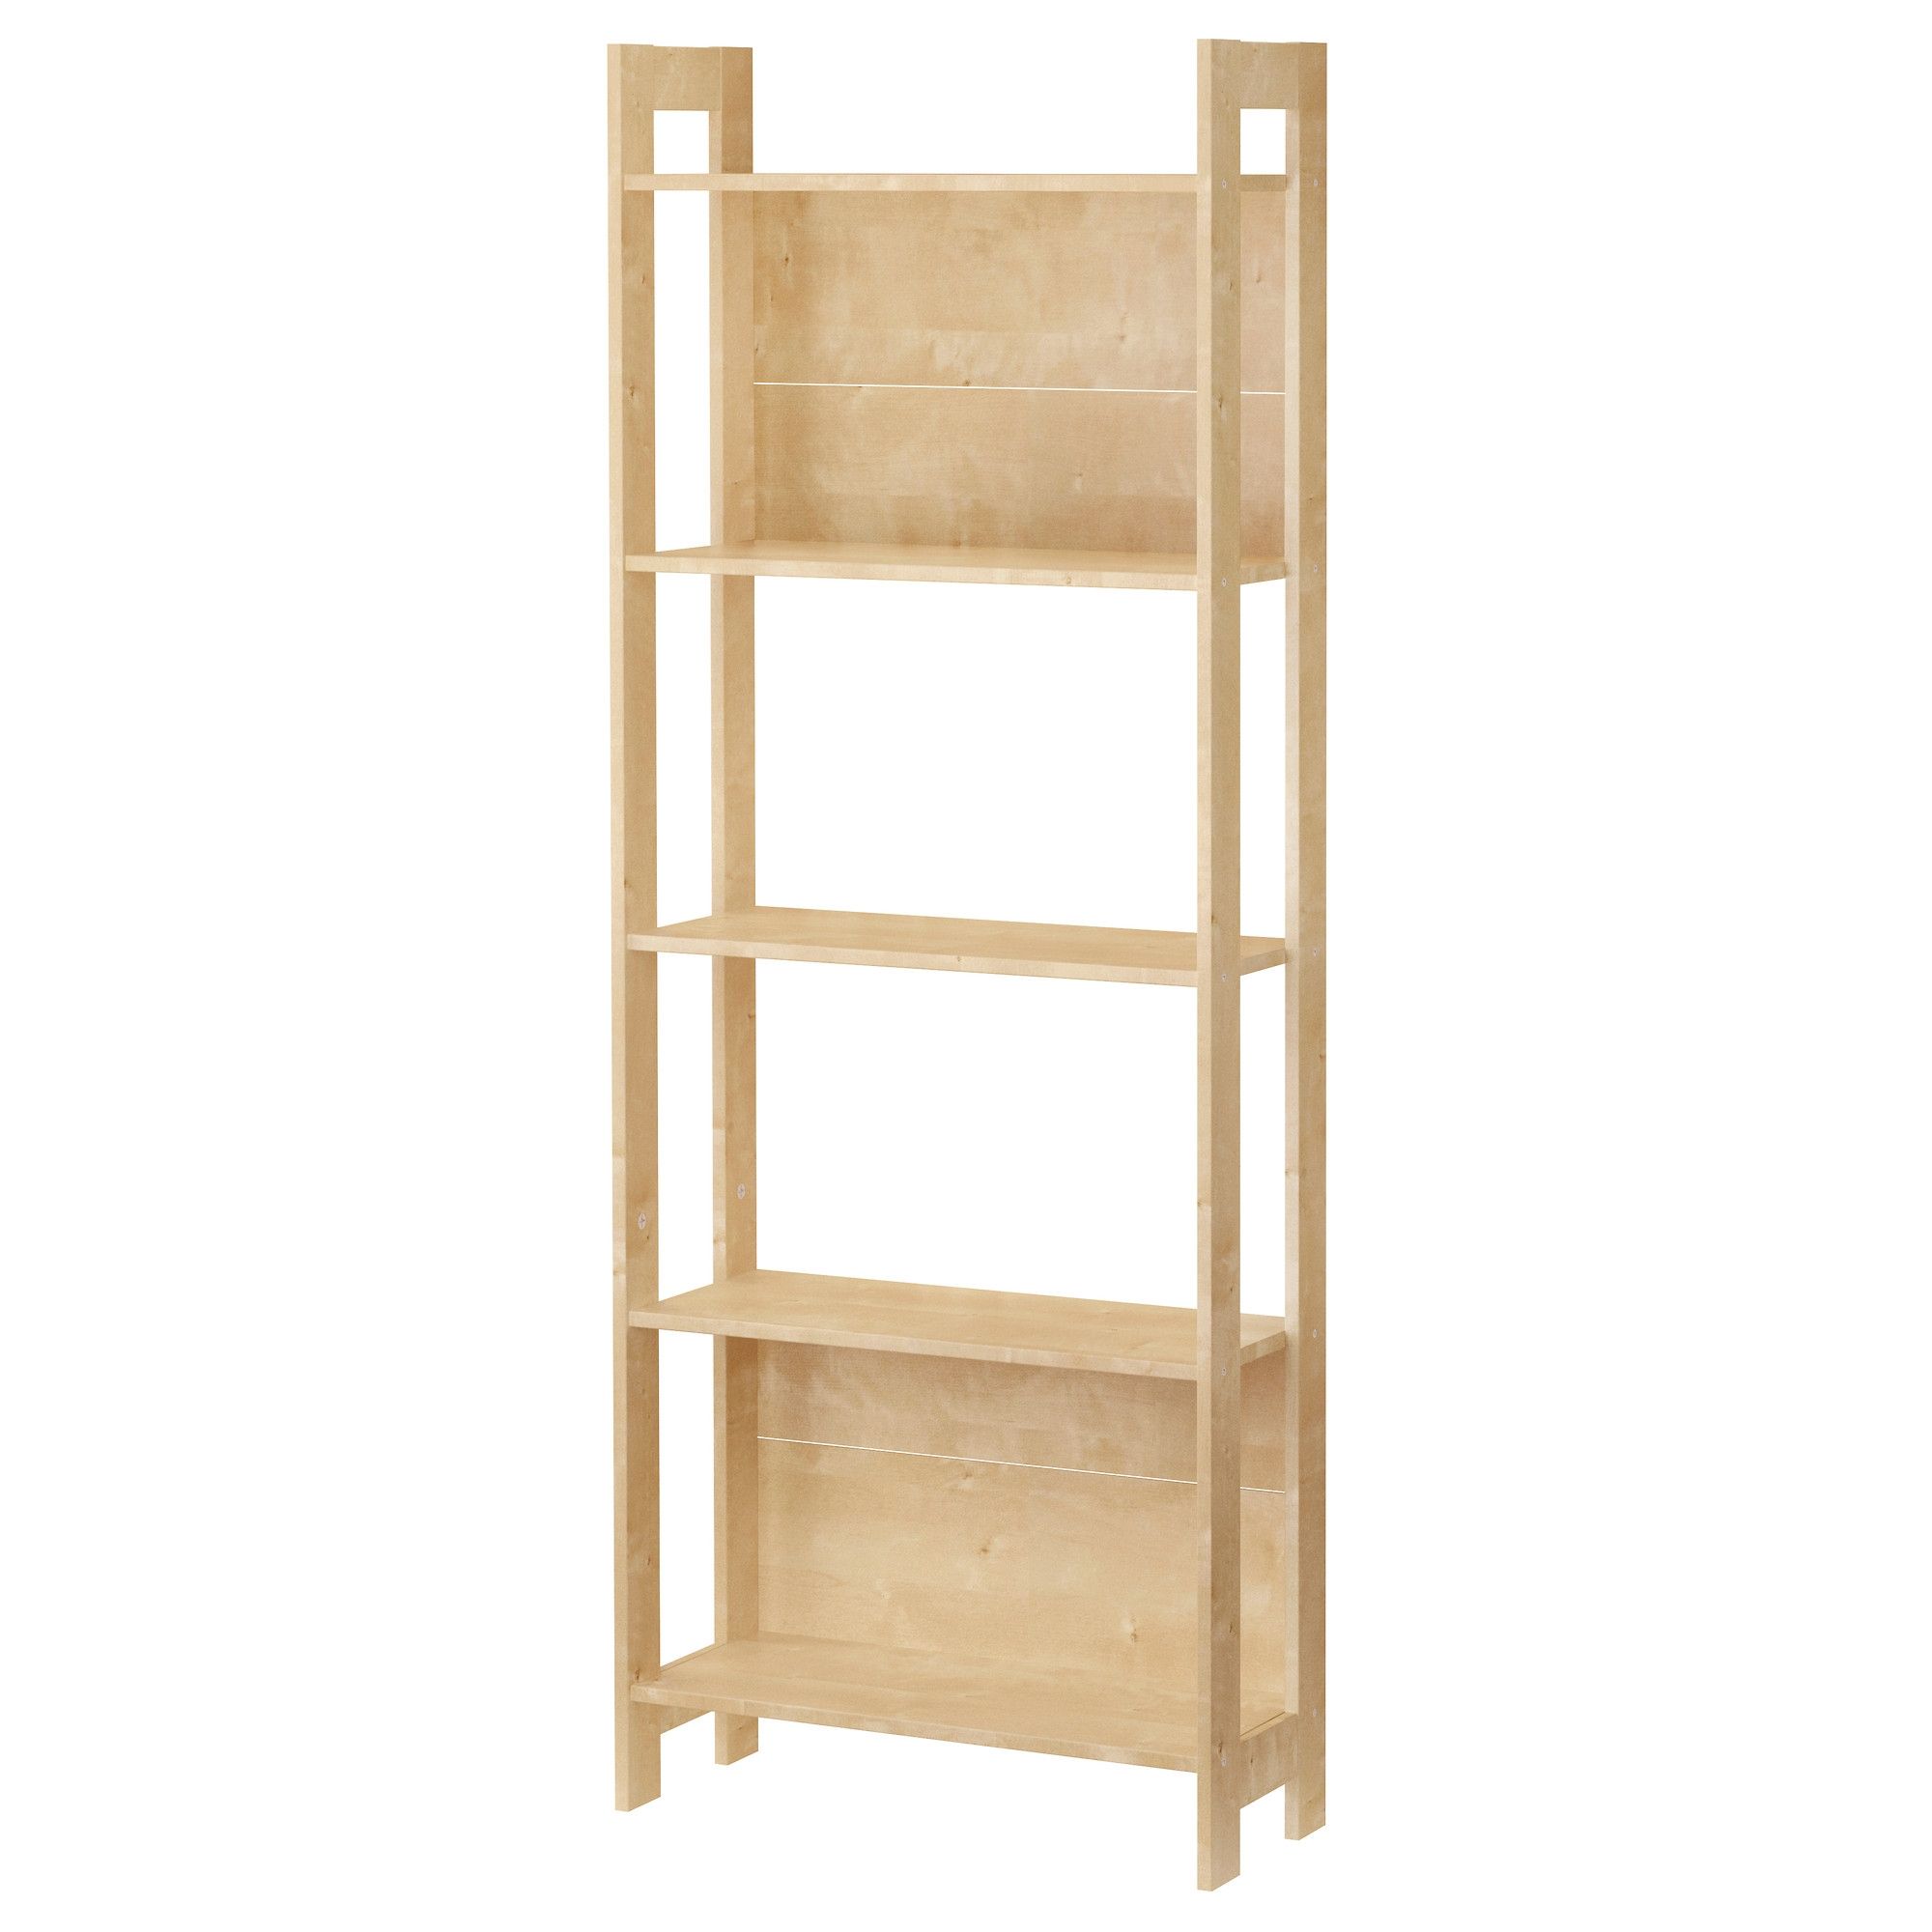 Laiva Bookcase Birch Effect 62×165 Cm Ikea Inside Bookcase Flat Pack (View 8 of 15)